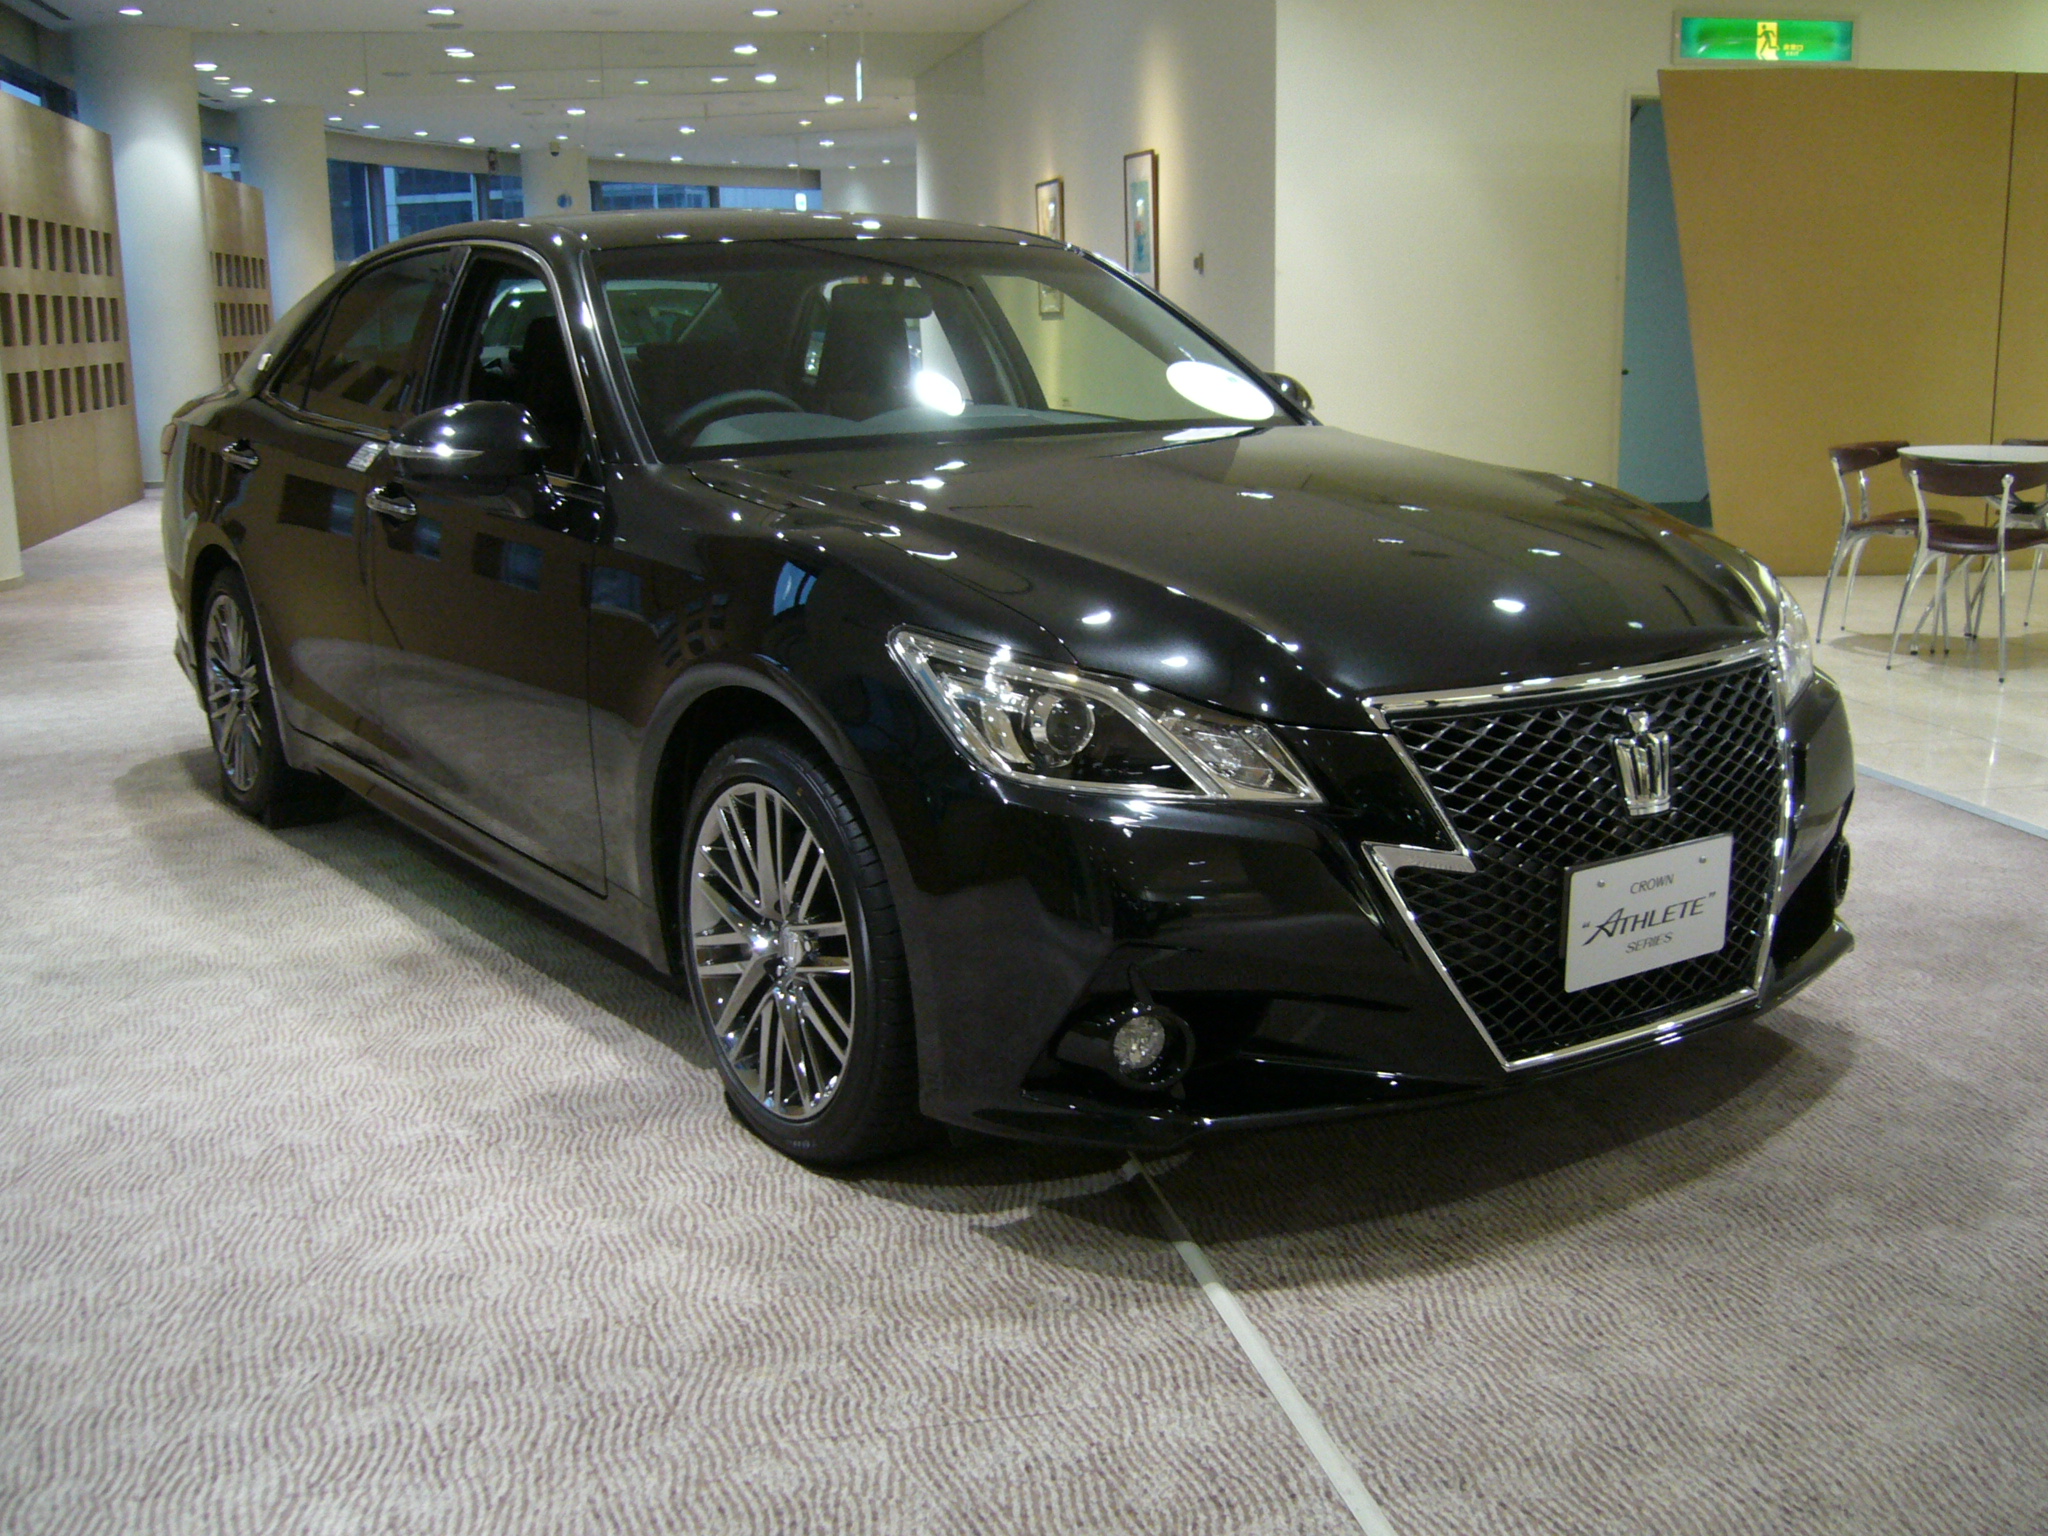 Toyota Crown Royal Saloon 2013: Review, Amazing Pictures and Images